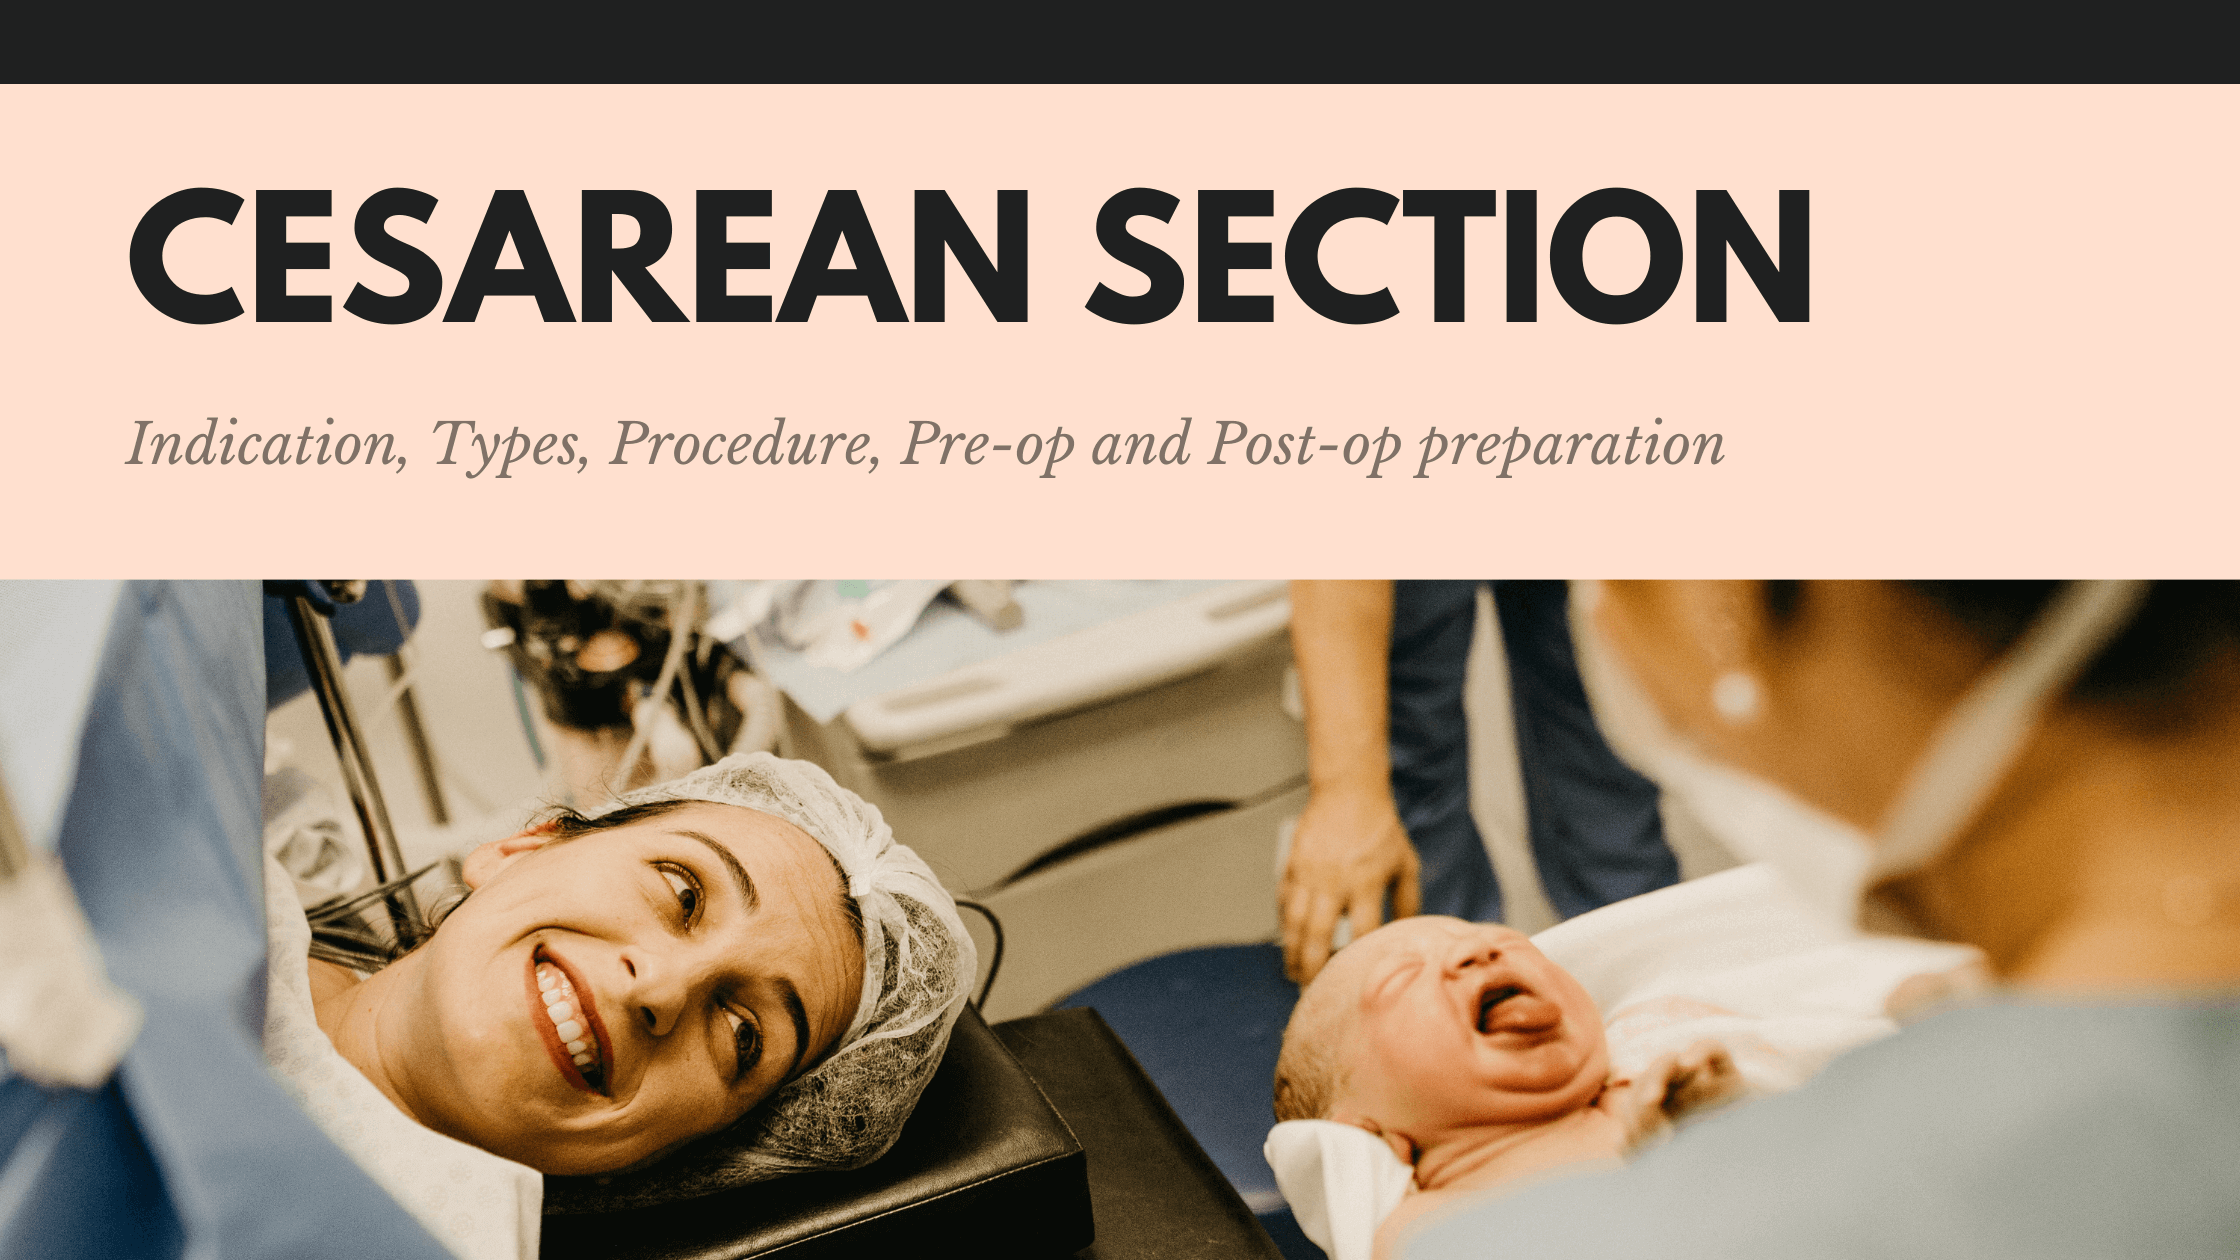 Every thing you need to know about cesarean sectionO